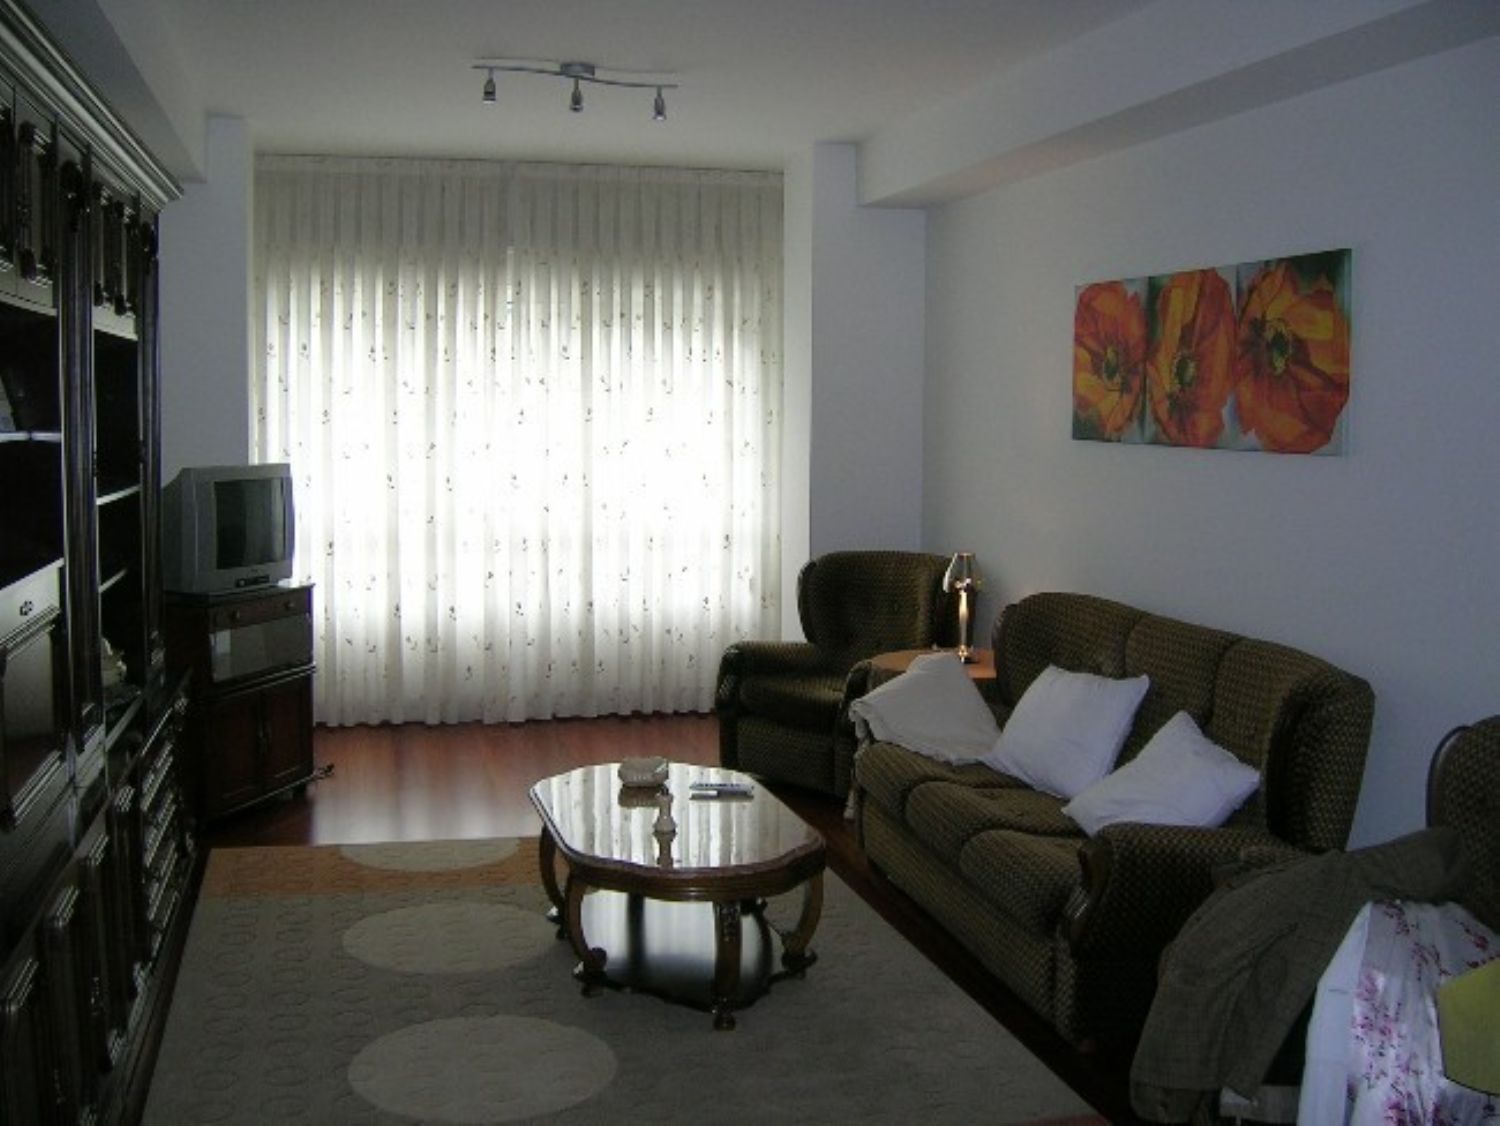 Apartment for sale on the seafront on Mariano Pola street, in Gijón